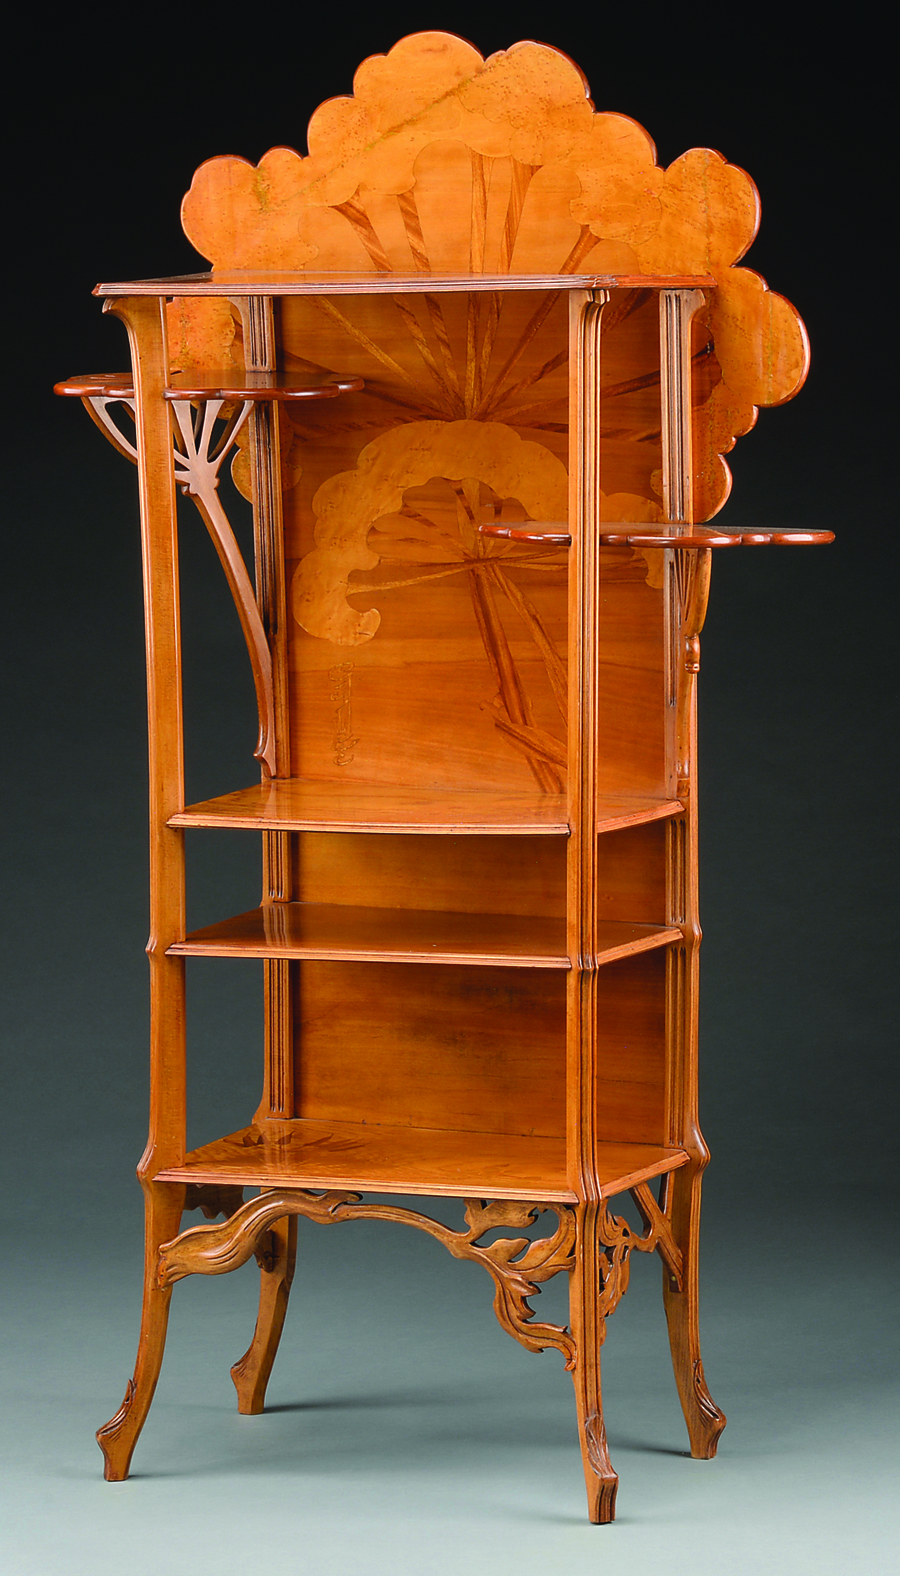 Some of the Galle furniture did not sell, but this circa 1900 signed Galle étagère brought $ 7,703. It had “Ombelle” floral decoration and marquetry and was 62½ inches tall and was illustrated in Alastair Duncan’s book on Galle furniture.